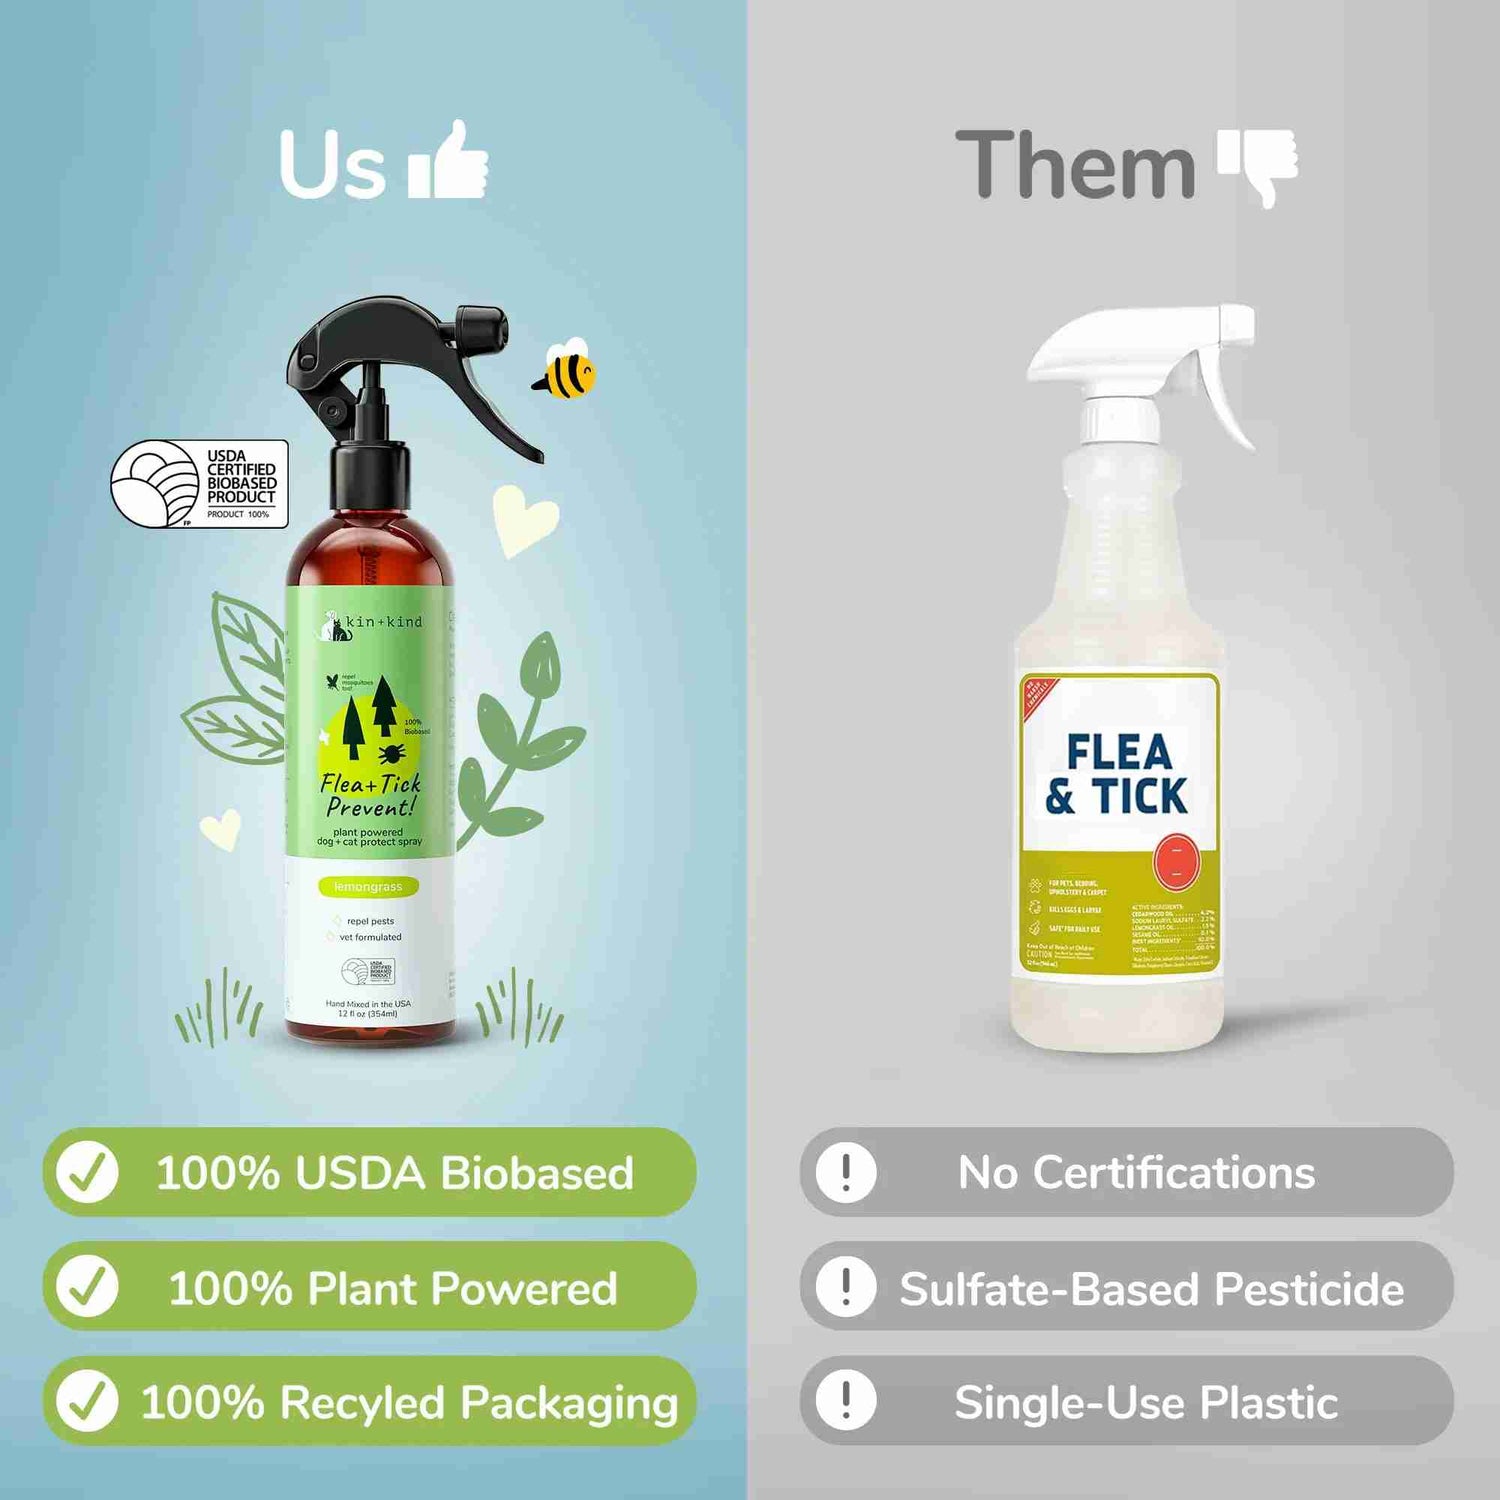 Flea and Tick Prevent - Kin and Kind Front of bottle 12 fl oz for dog and cat lemongrass scent repel pest and vet formulated comparison to other brands